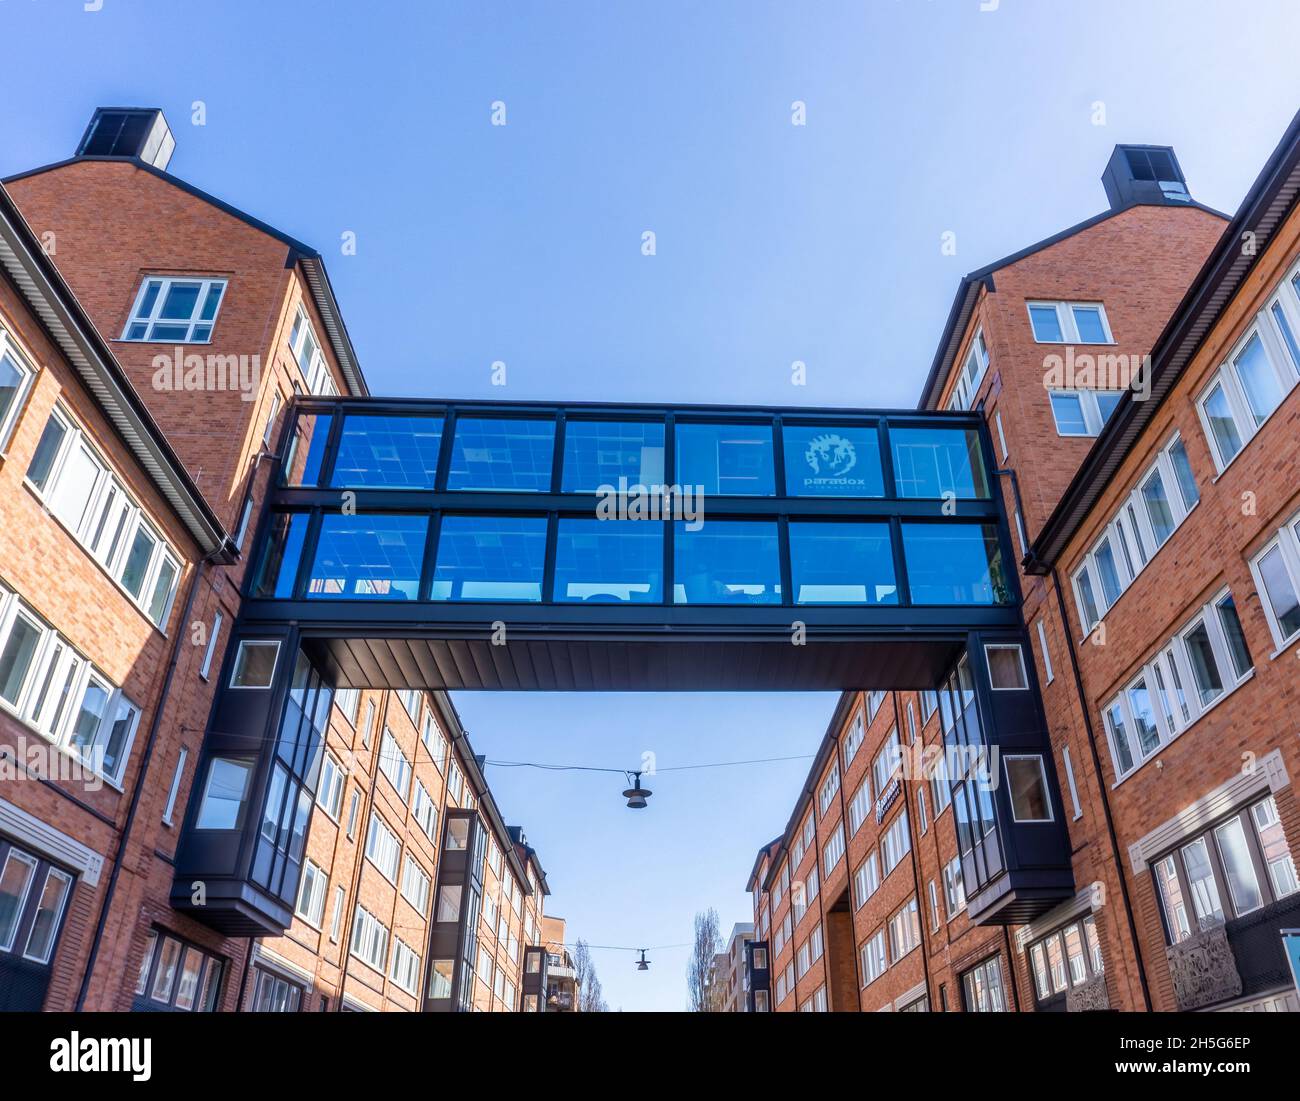 Stockholm, Sweden - April 15, 2021: High bridge made with metal and glass above the street between two buildings Stock Photo